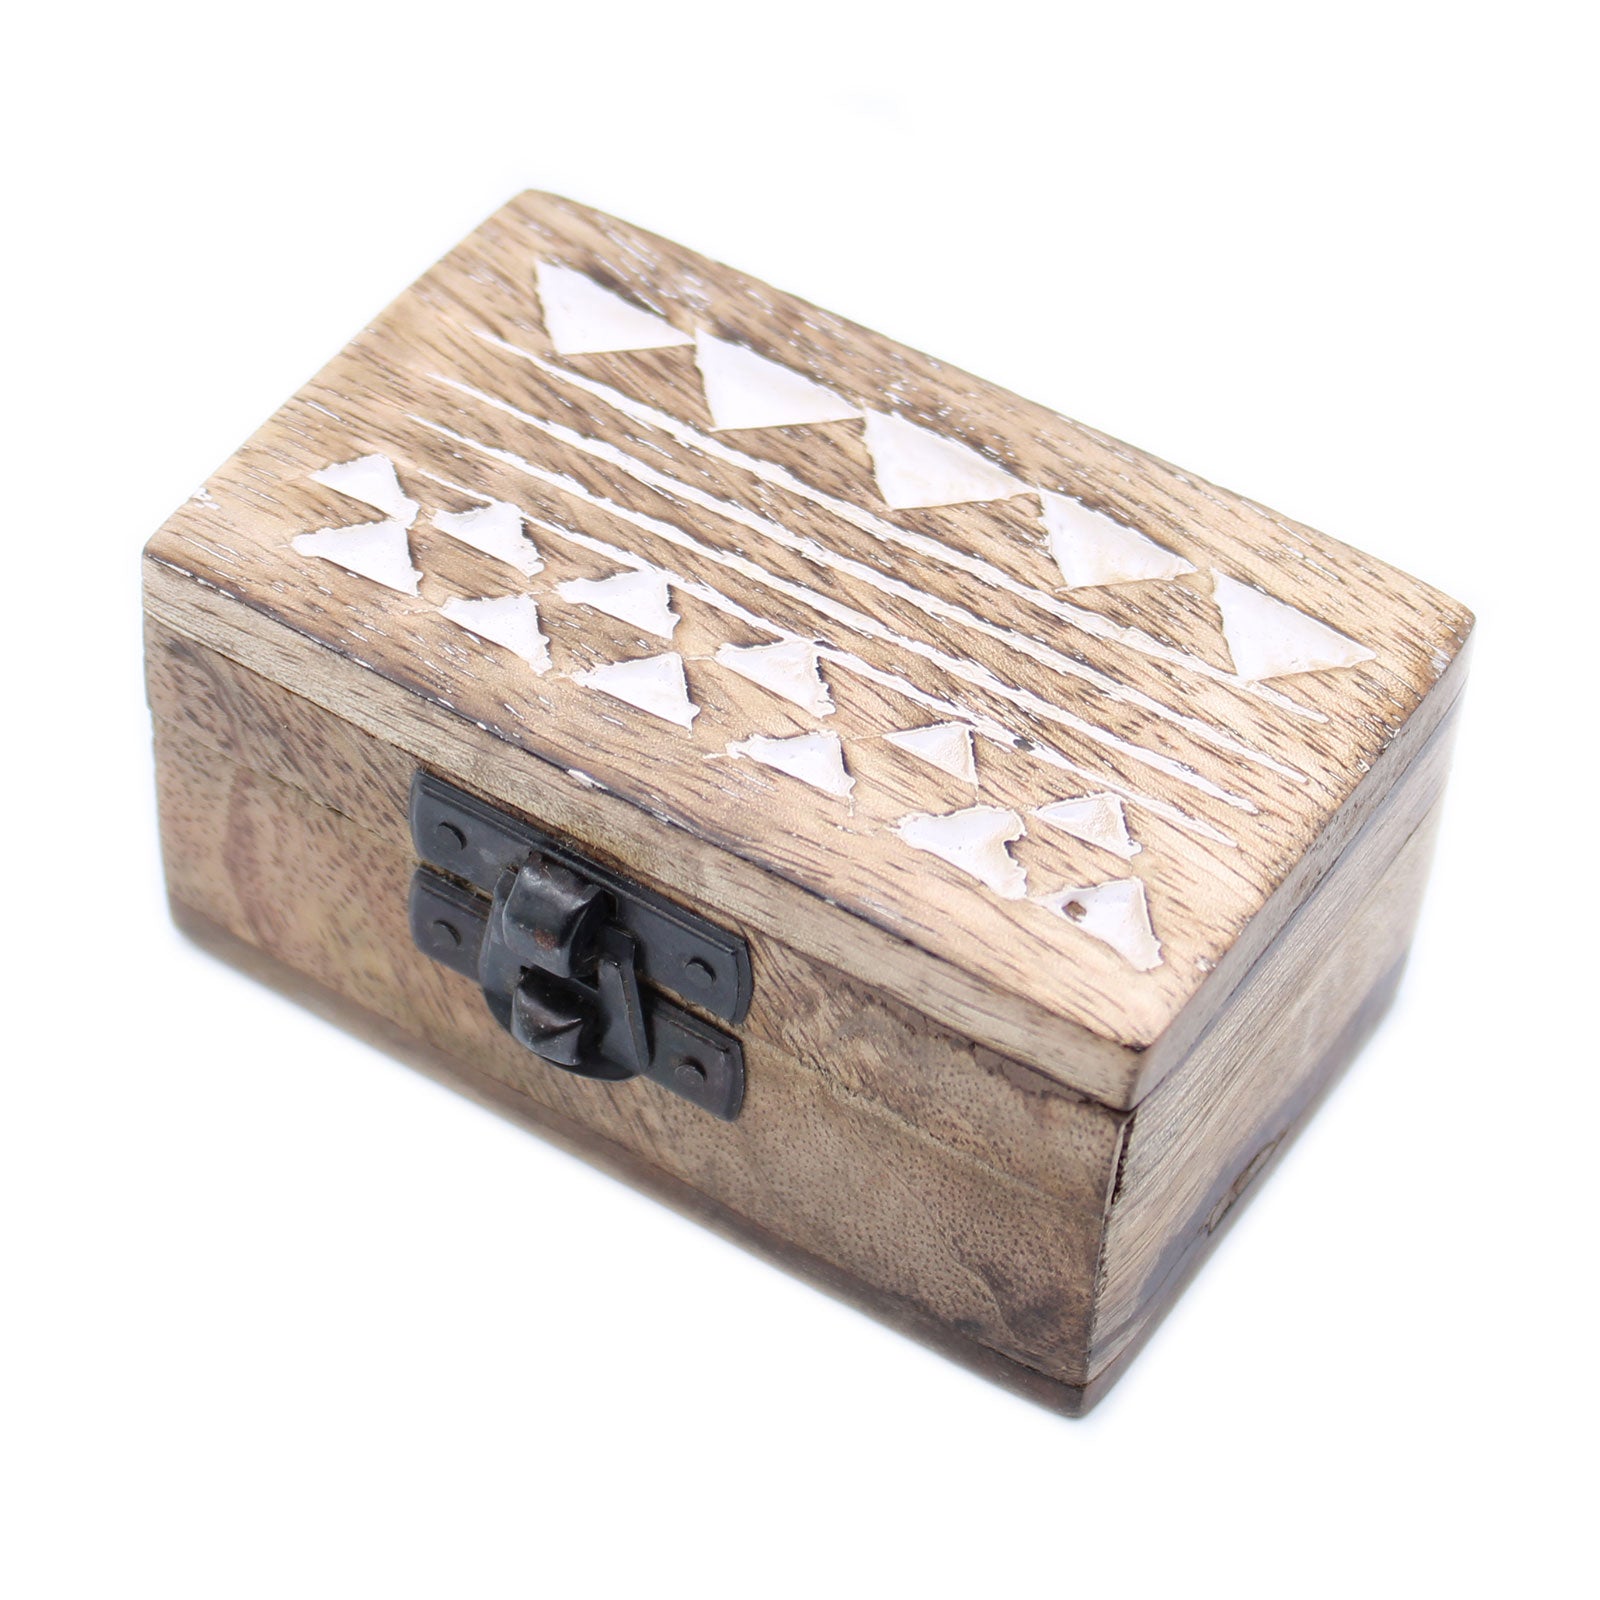 View White Washed Wooden Box Pill Box Aztec Design information